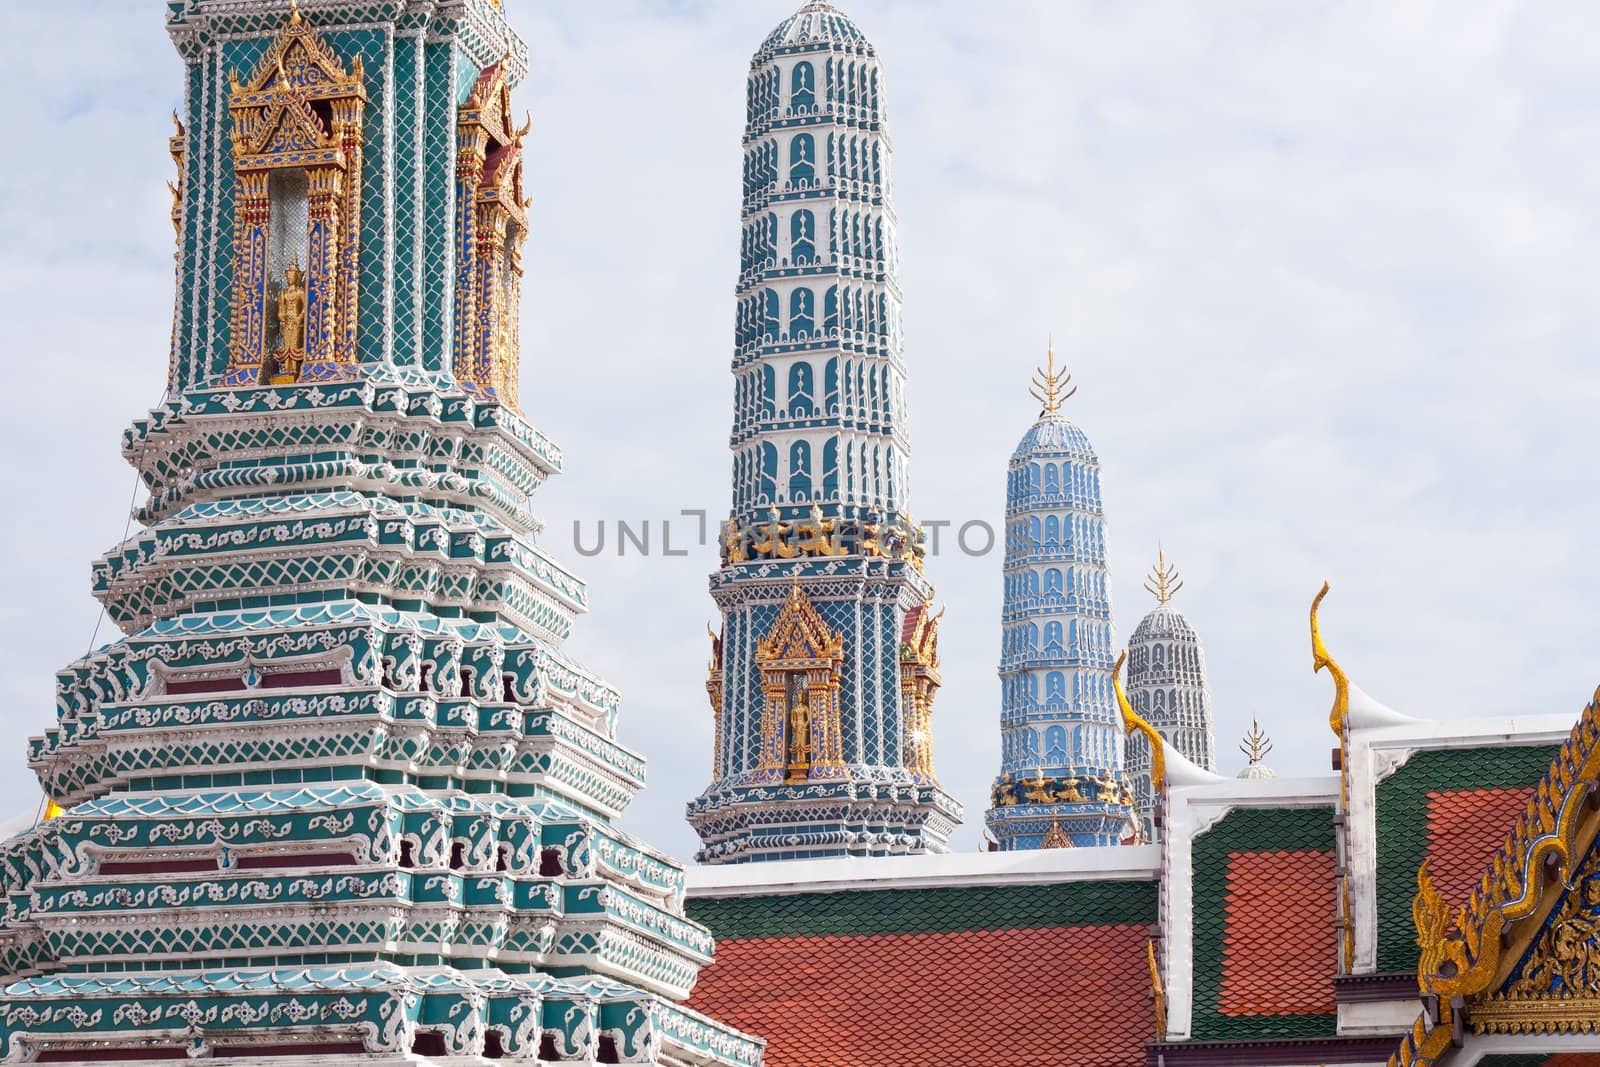 Giant Pagoda and the Temple of the attractions of Bangkok.